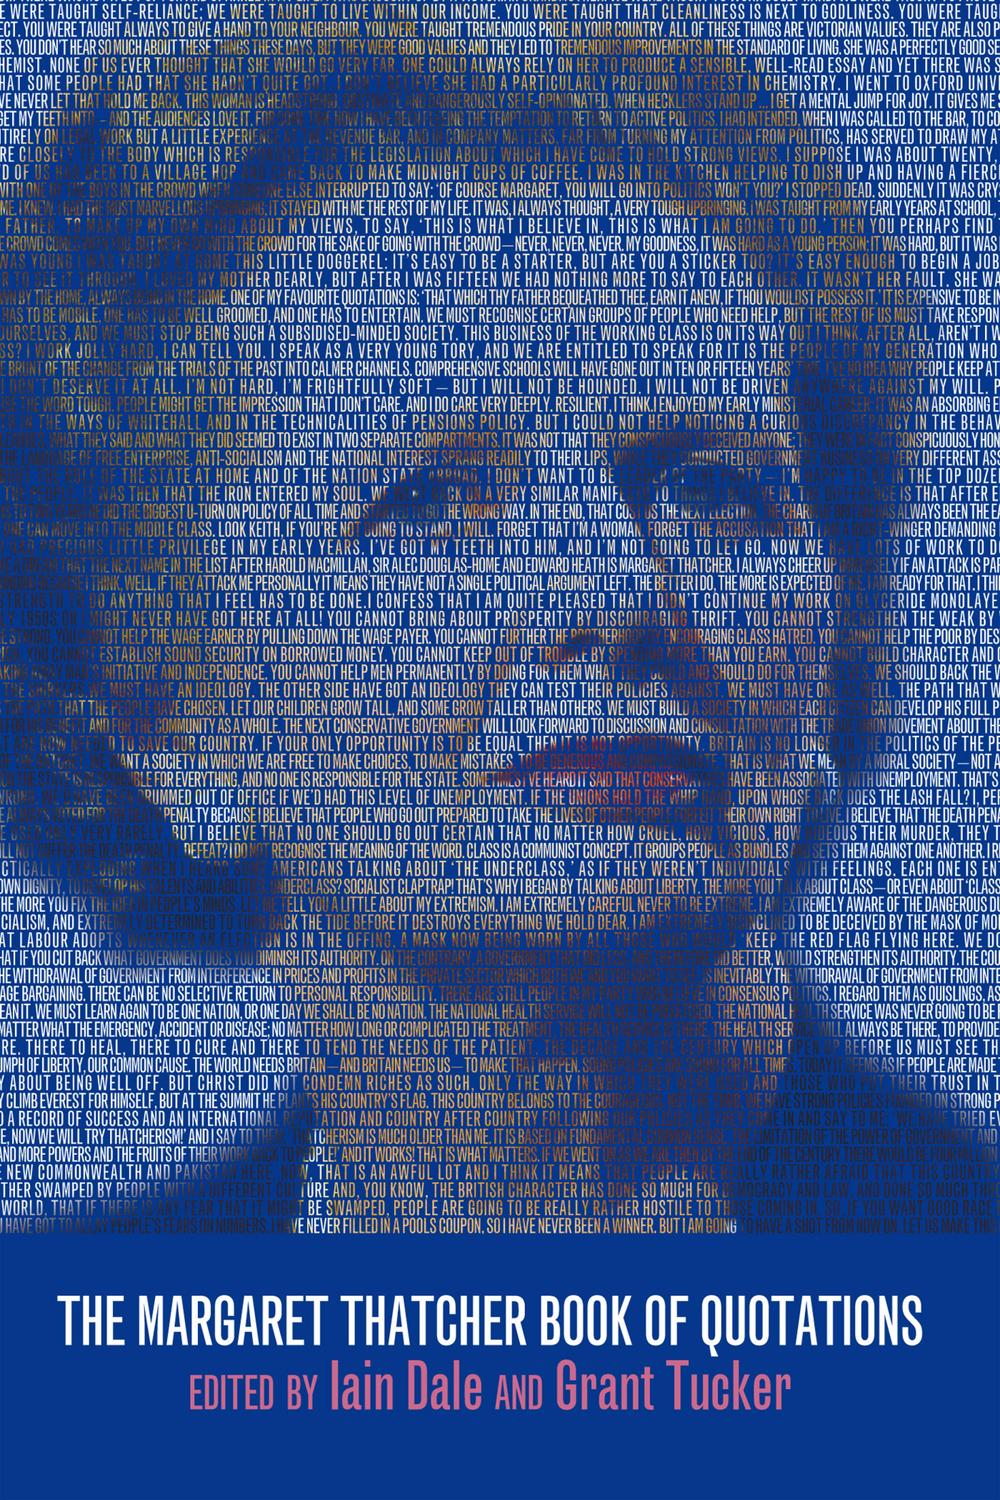 The Margaret Thatcher Book of Quotations - Iain Dale